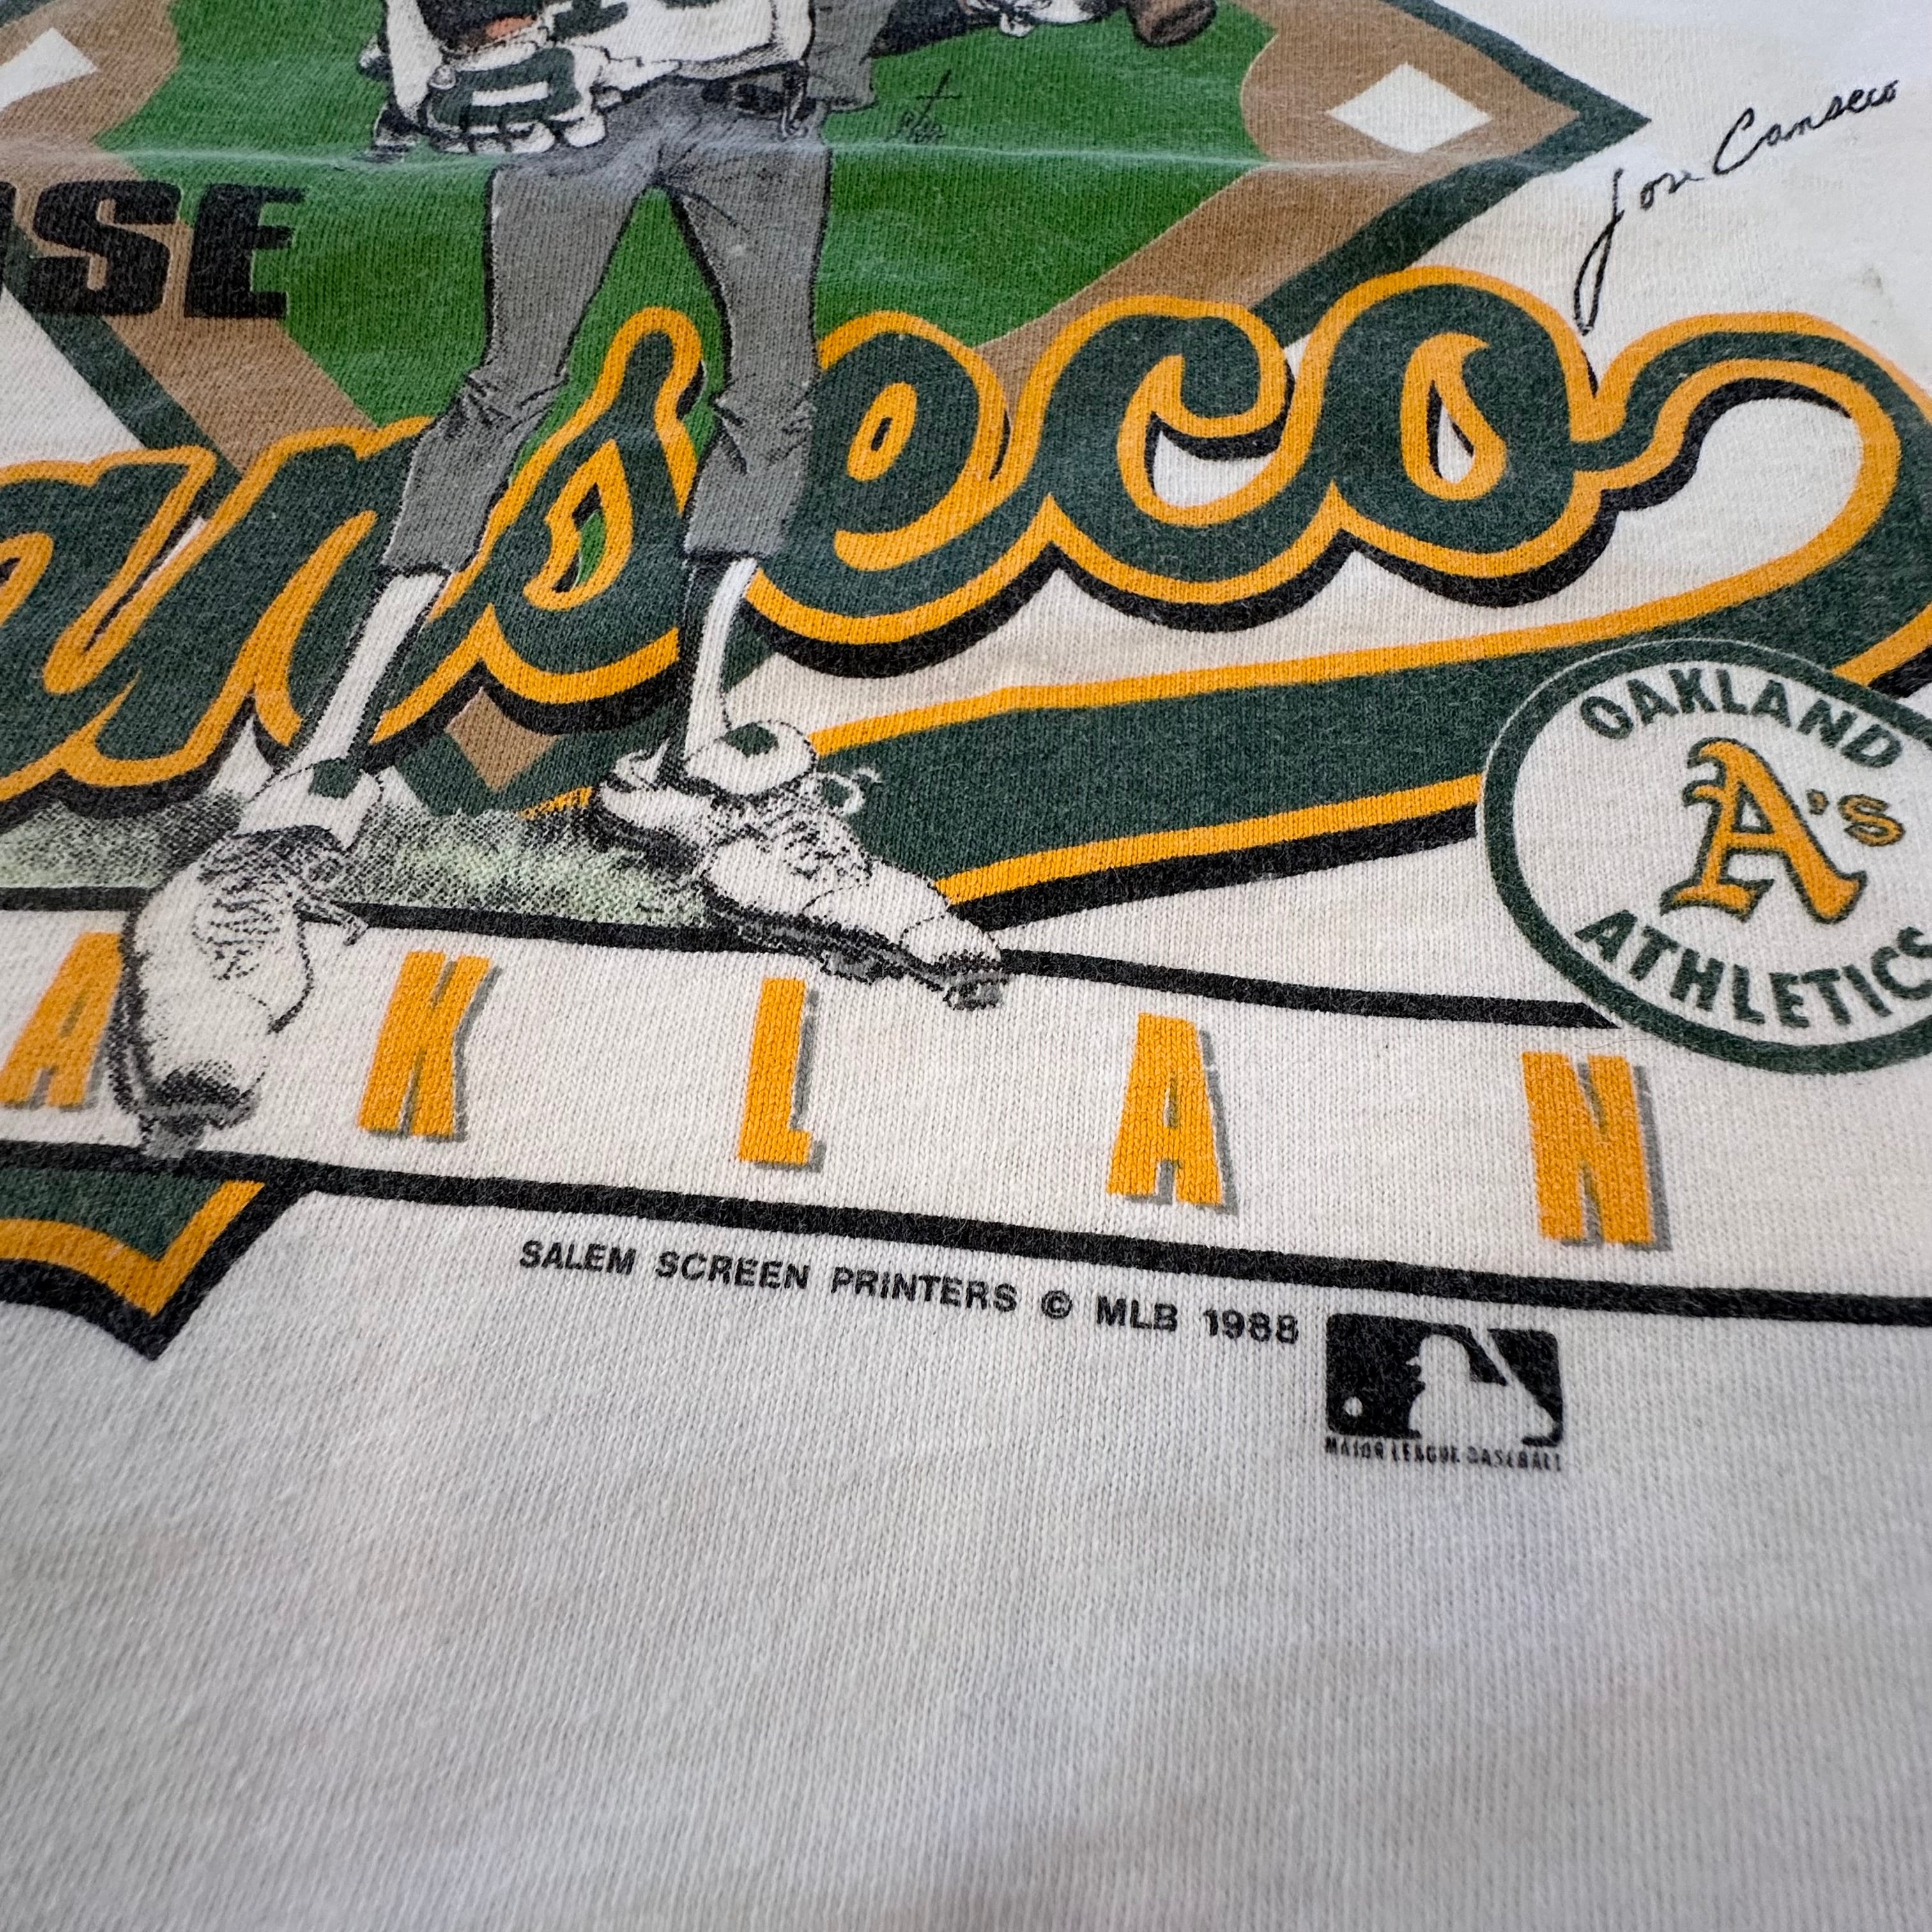 1988 Jose Canseco Oakland Athletics T-Shirt Sz M (A403) – 4th